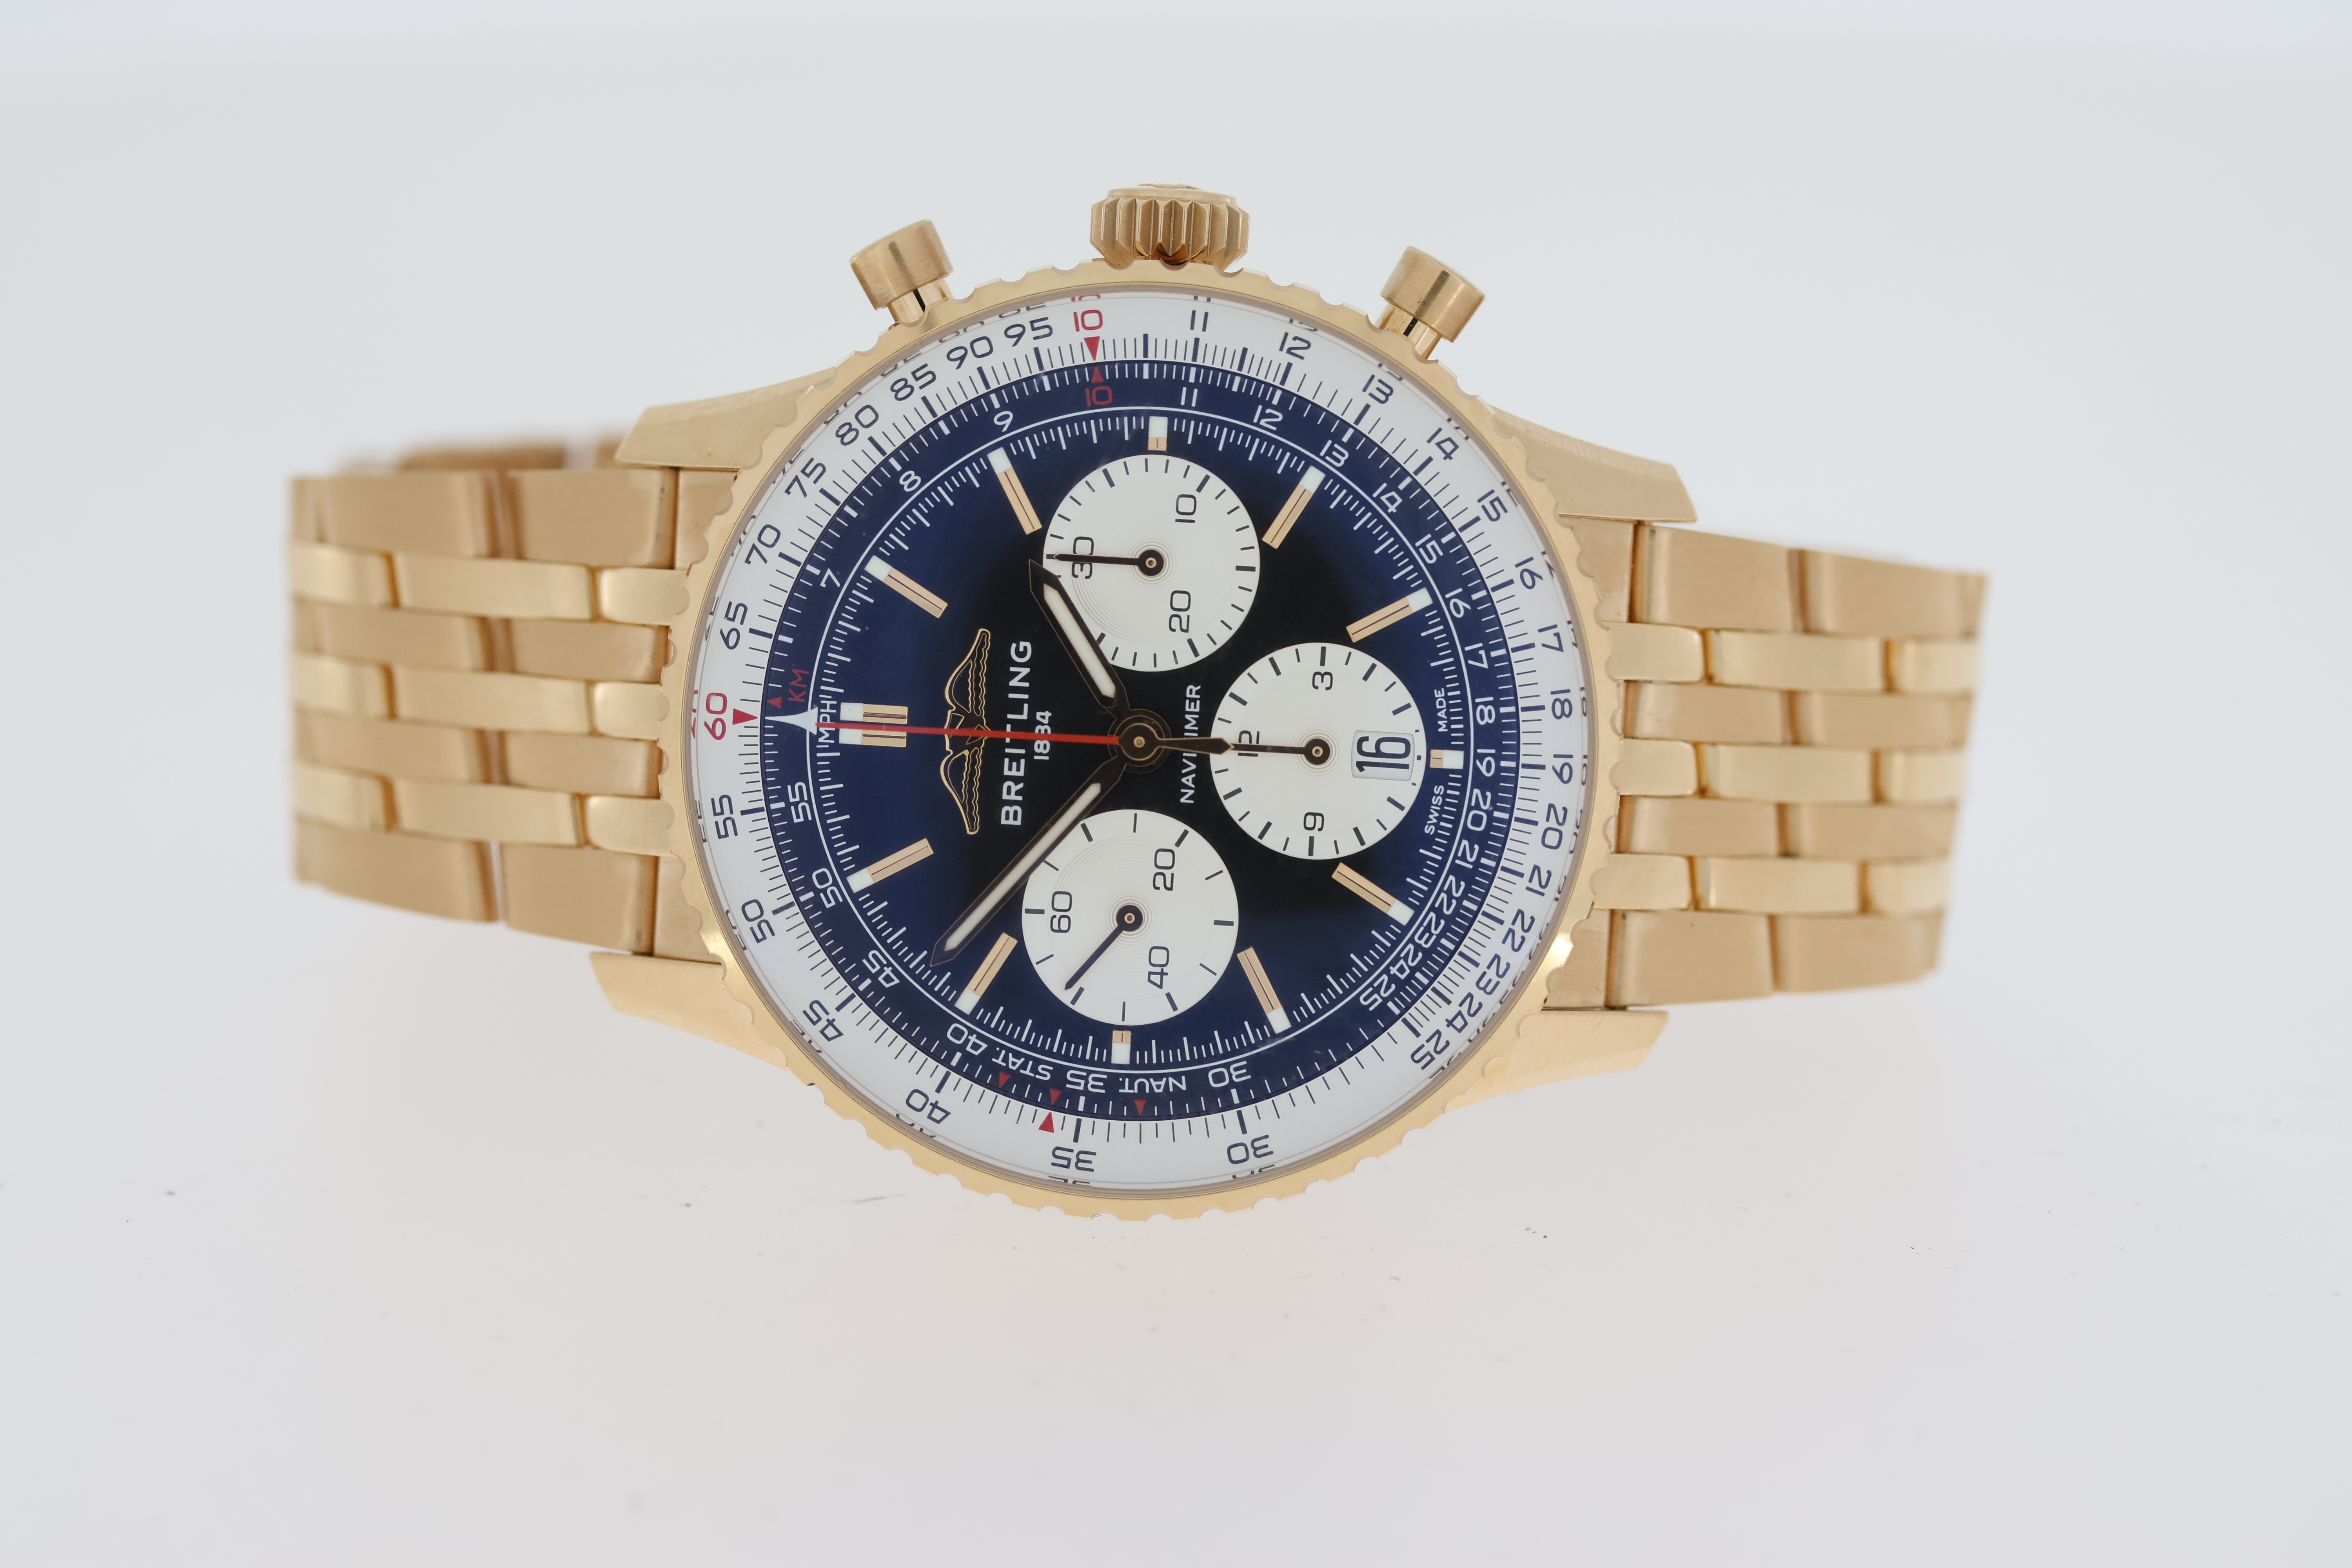 18ct Breitling Navitimer B01 Rose Gold Chronograph Automatic with Box and Papers - Image 3 of 7